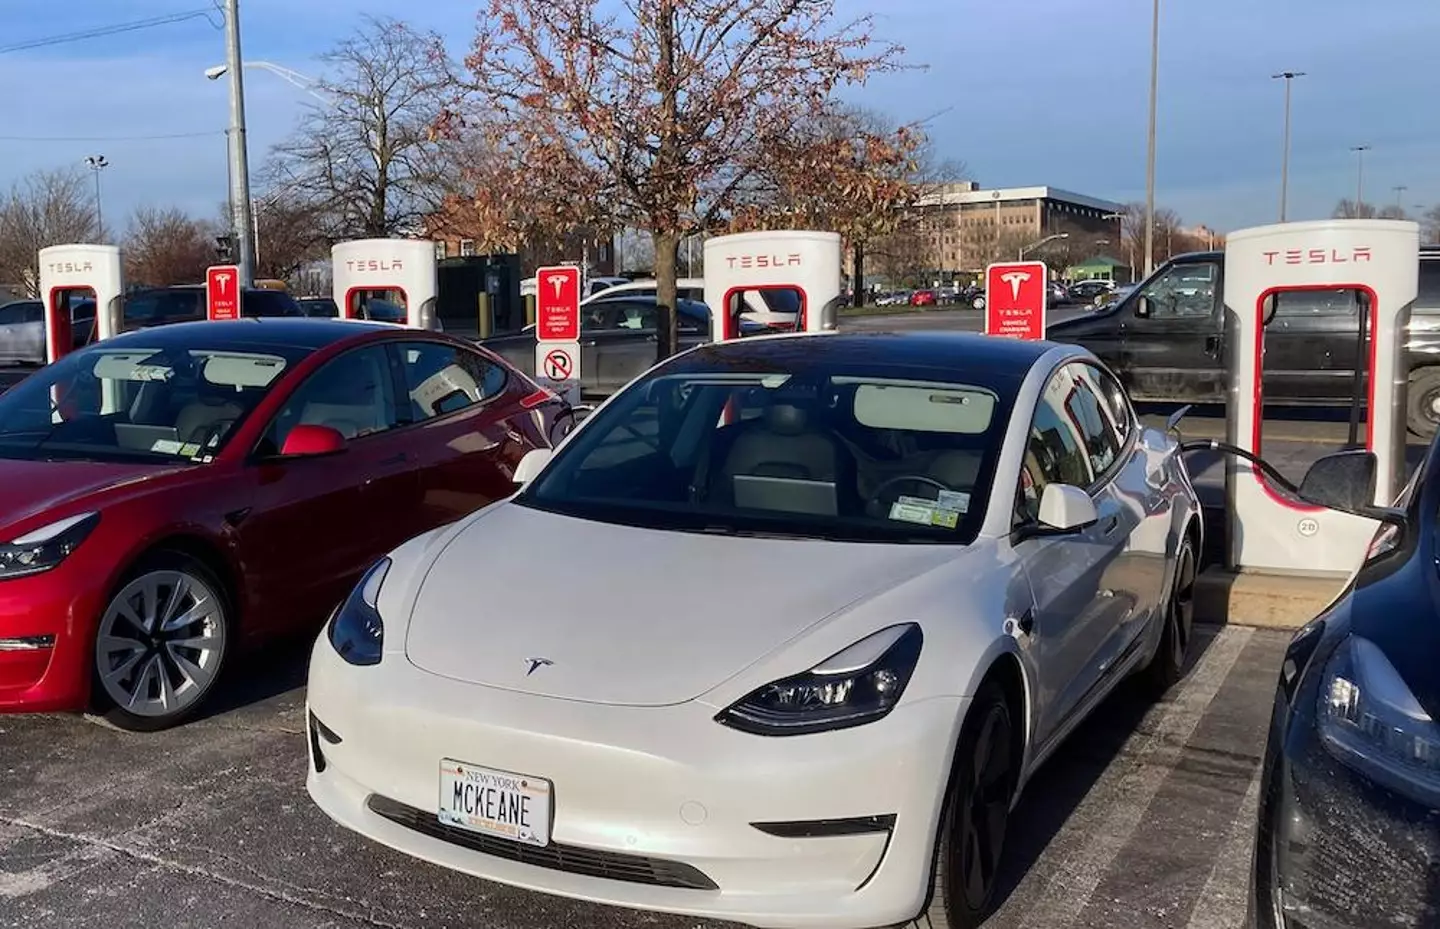 Tesla customers have been left furious by the sudden price drops.